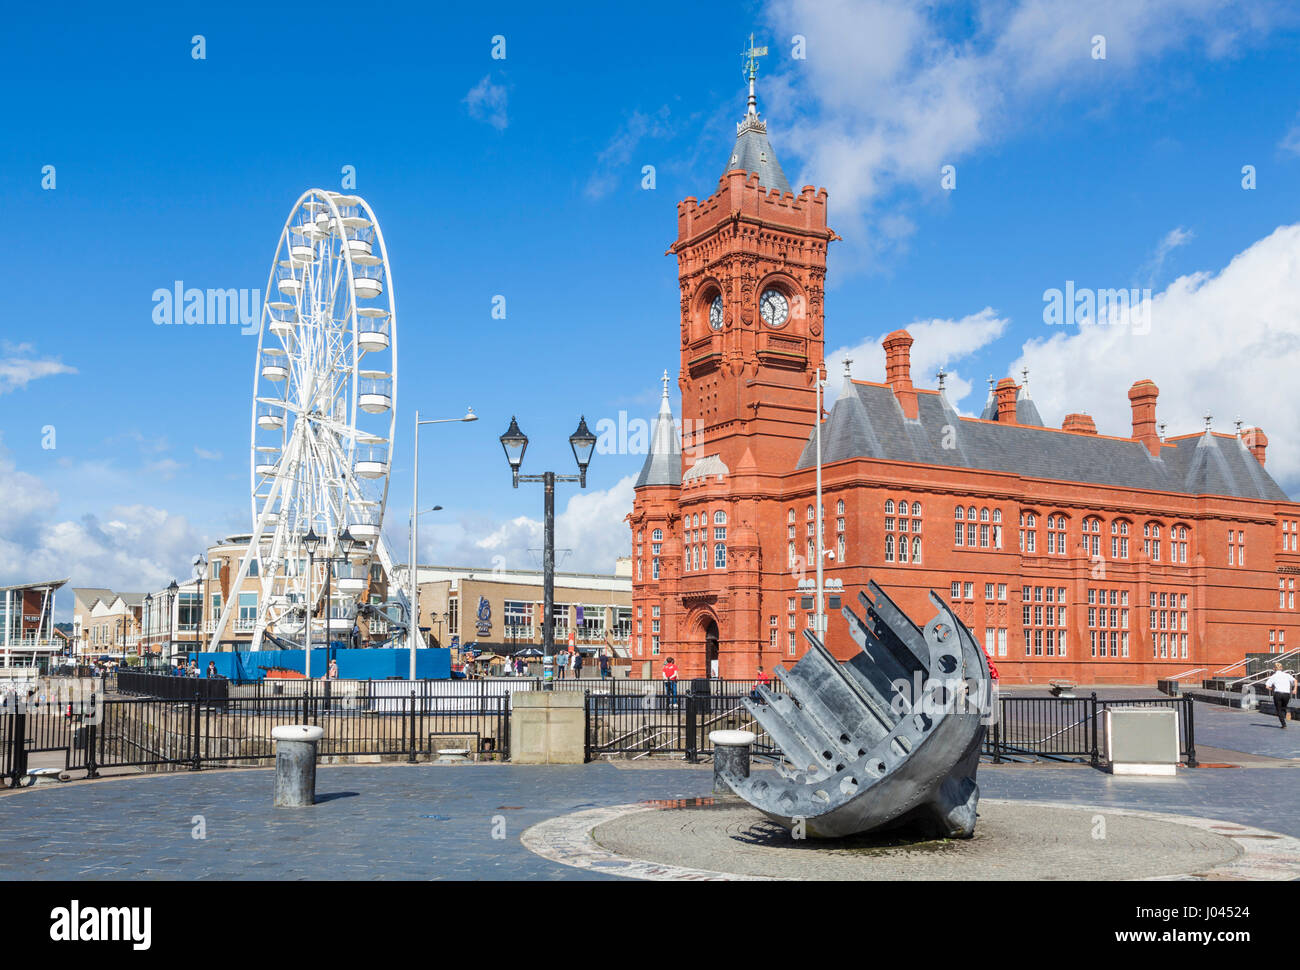 Cardiff Bay Grande roue carousel waterfront Pierhead Building Cardiff Bay Cardiff South Glamorgan South Wales GB UK EU Europe Banque D'Images